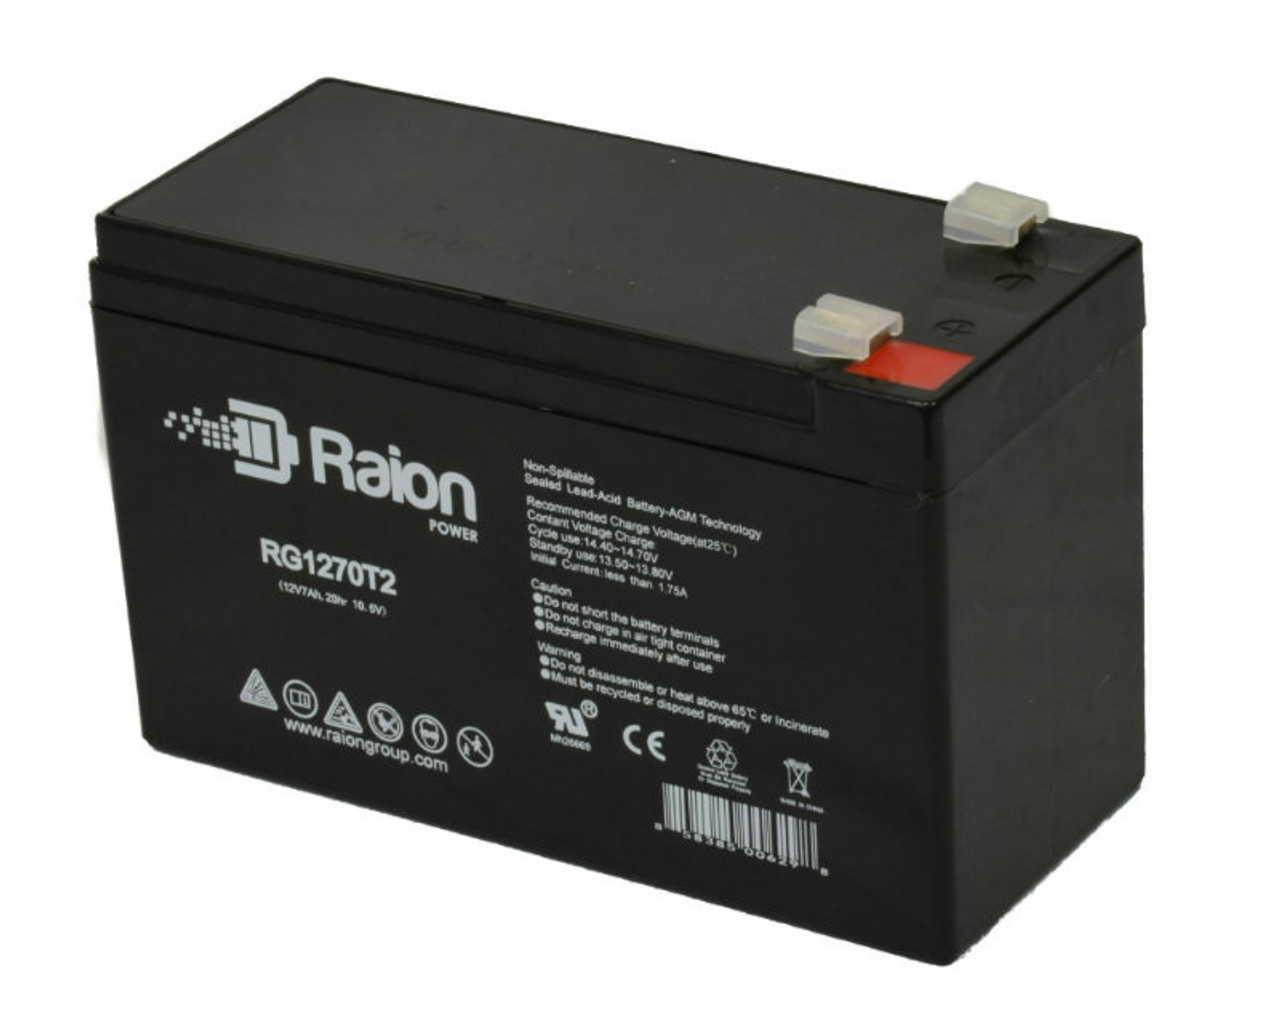 Raion Power RG1270T2 12V 7Ah Rechargeable Battery for Stannah 420 Straight Stairlift